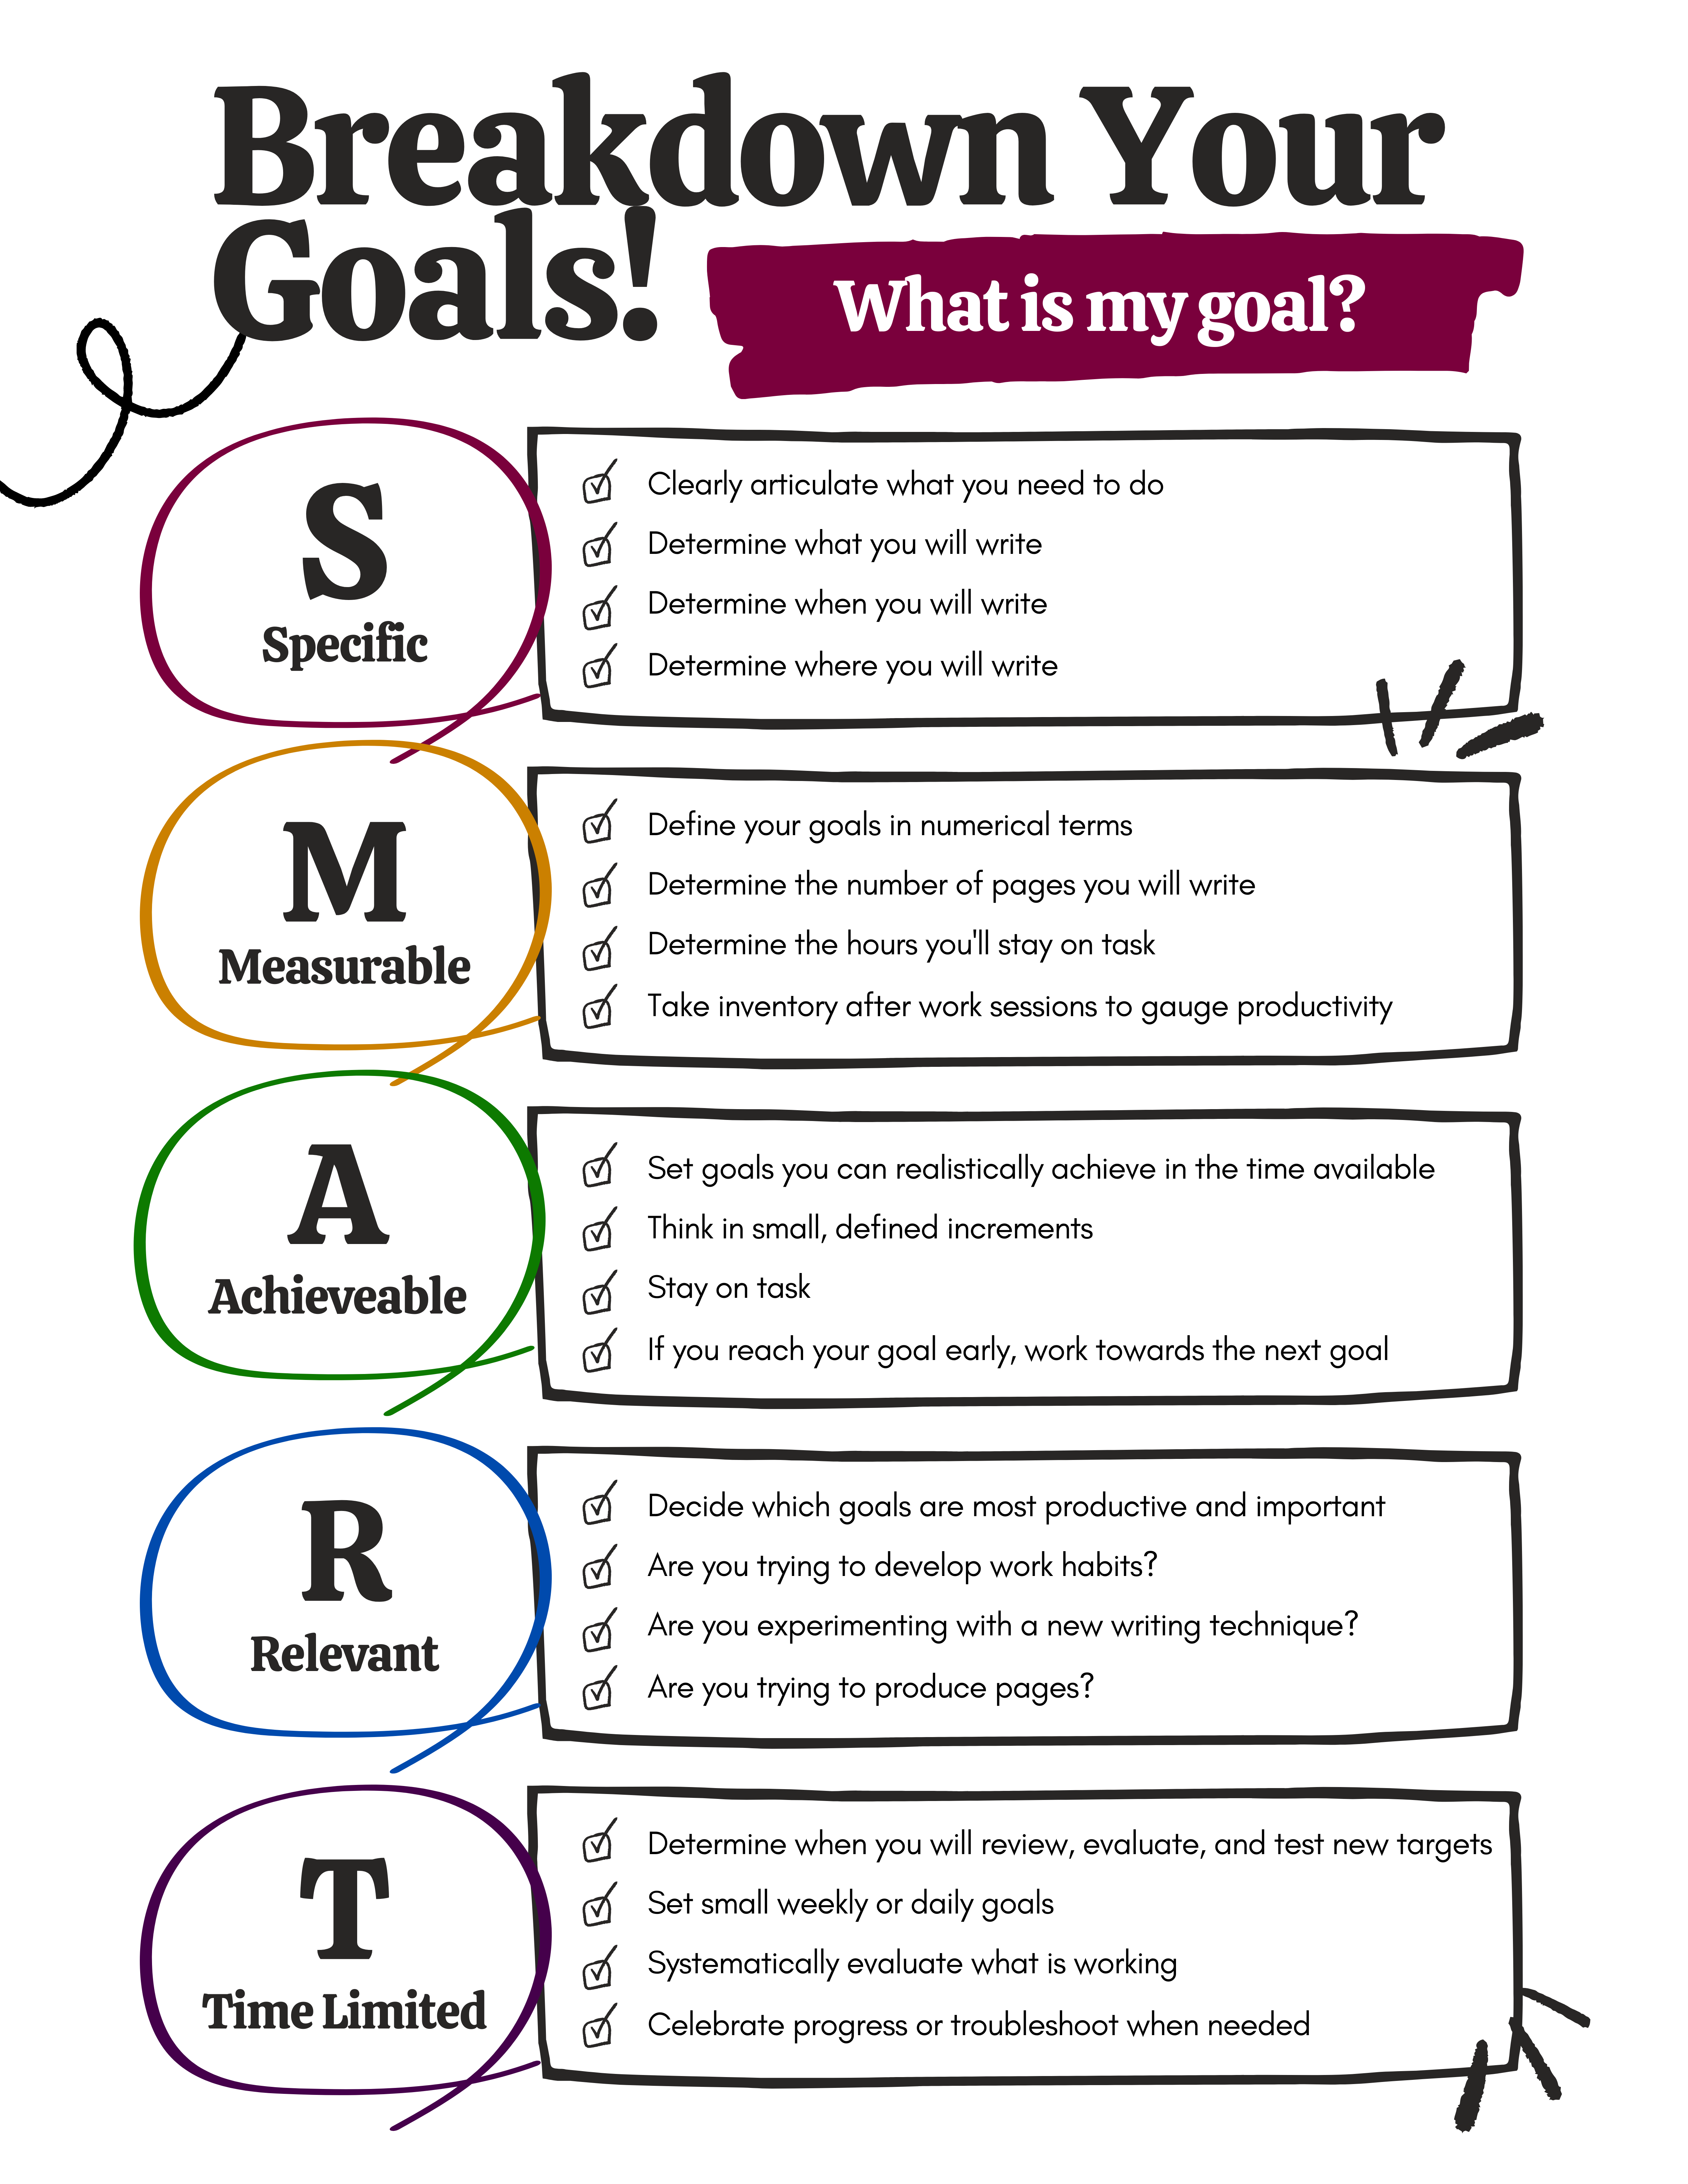 Poster outlining the acronym SMART (Specific, Measurable, Achievable, Relevant, and Time Limited) and how to use these categories to set goals with text description below.